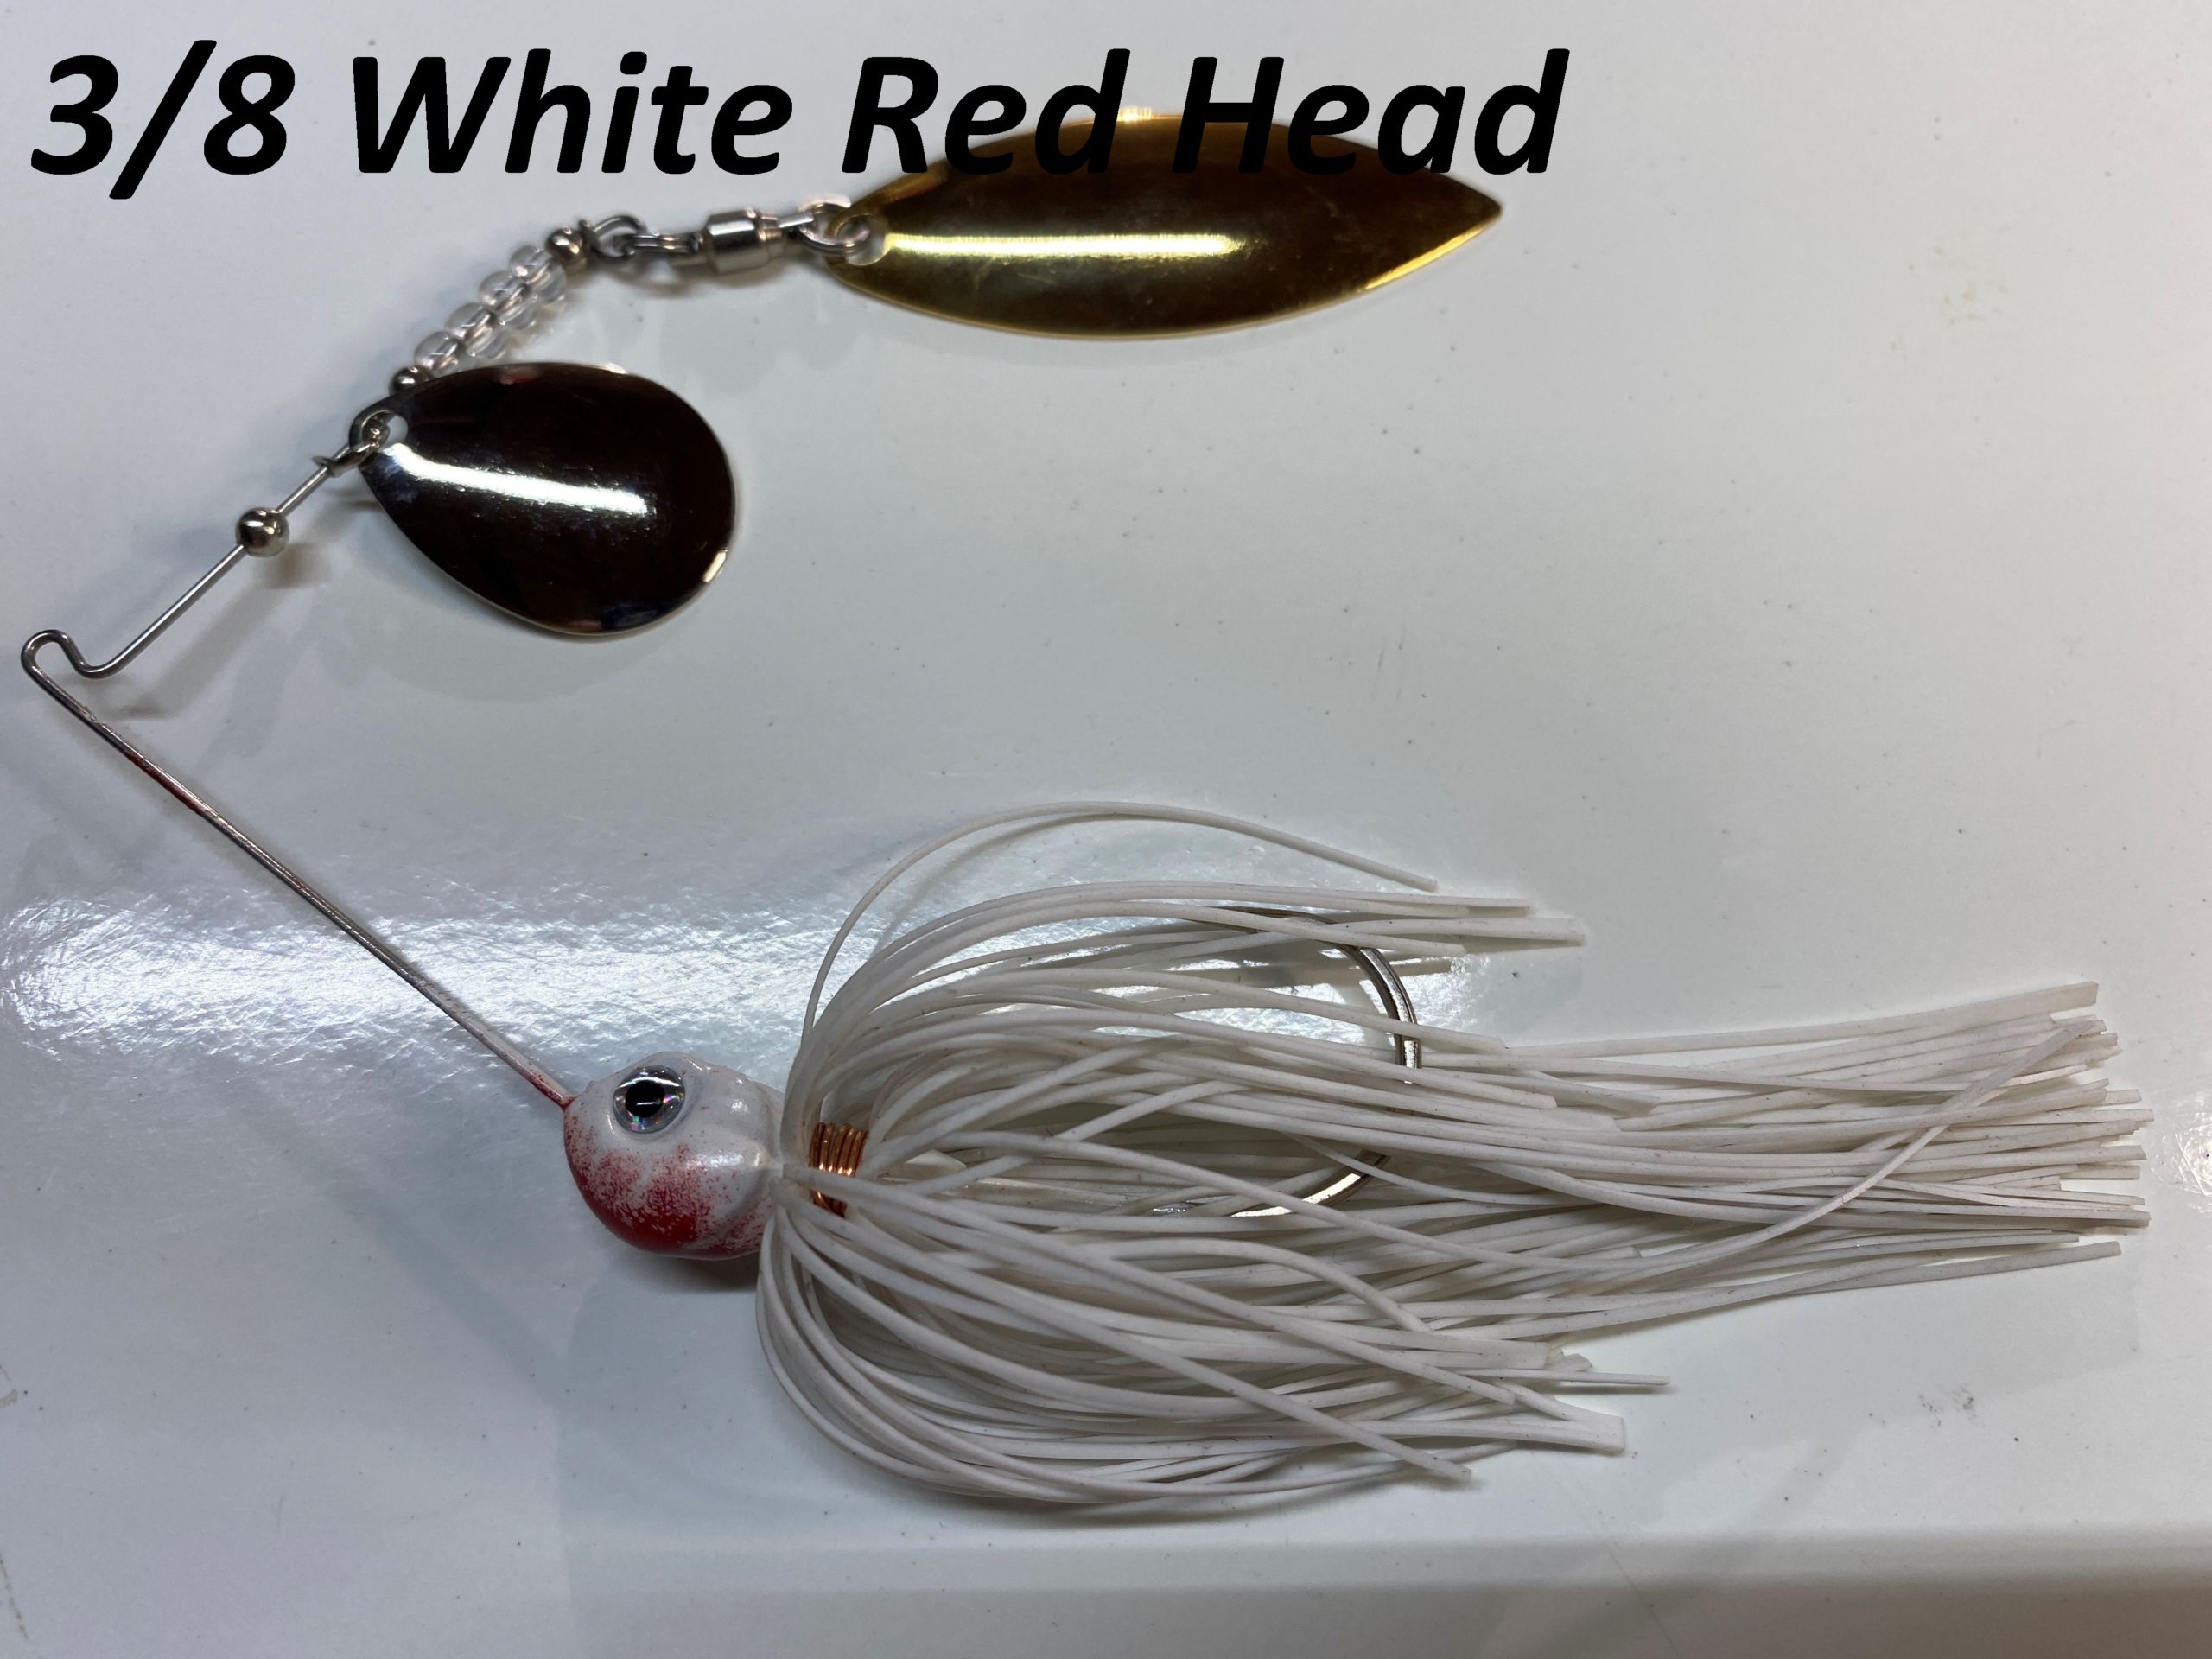 https://adrenalinetackleco.com/wp-content/uploads/2023/04/38-white-red-head-scaled.jpg